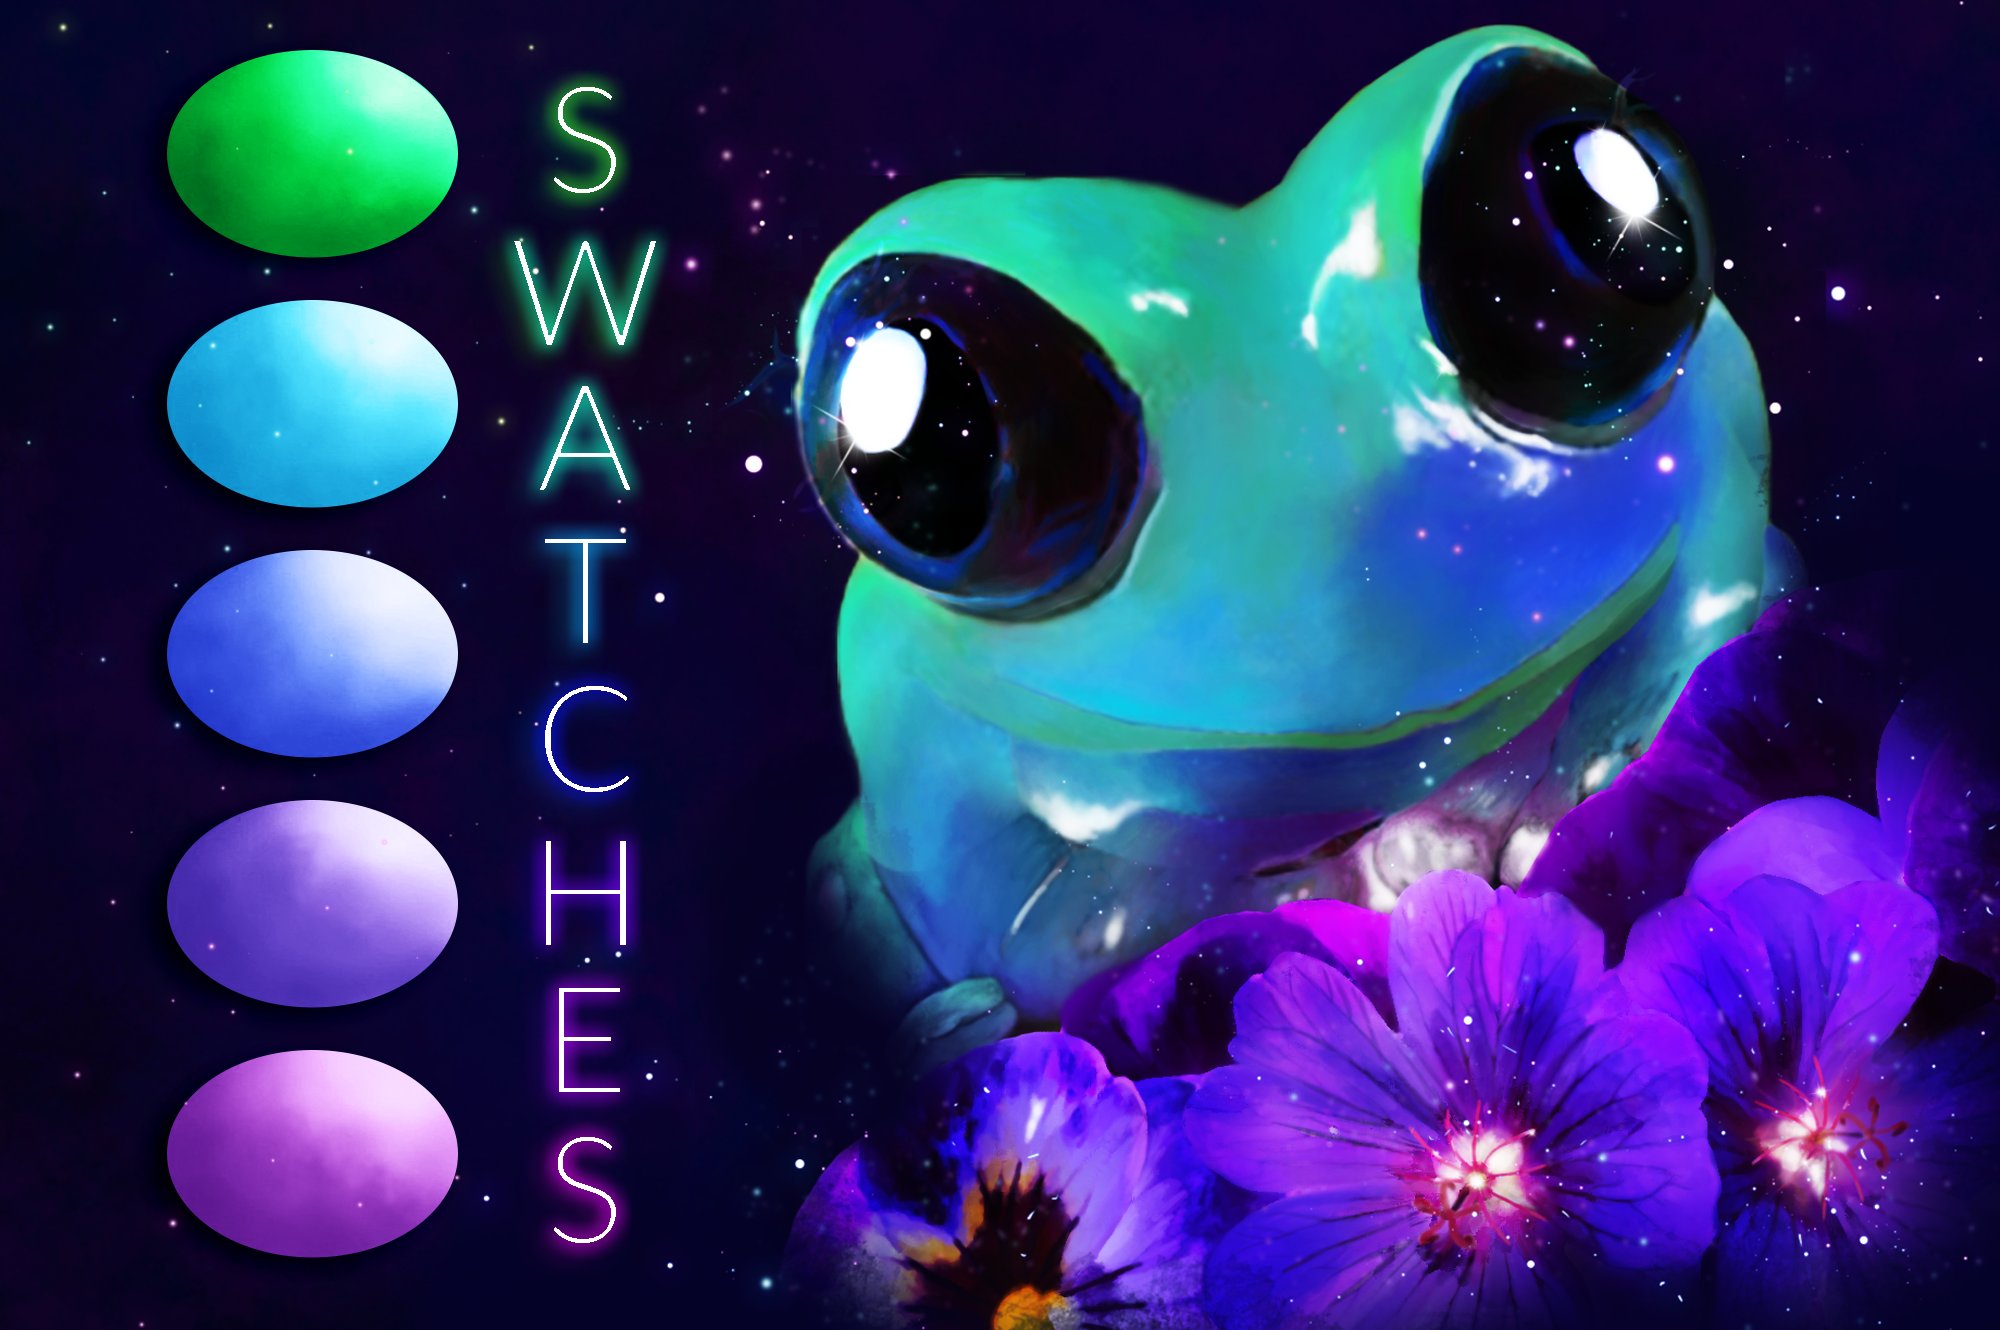 Frog Swatchespreview image.